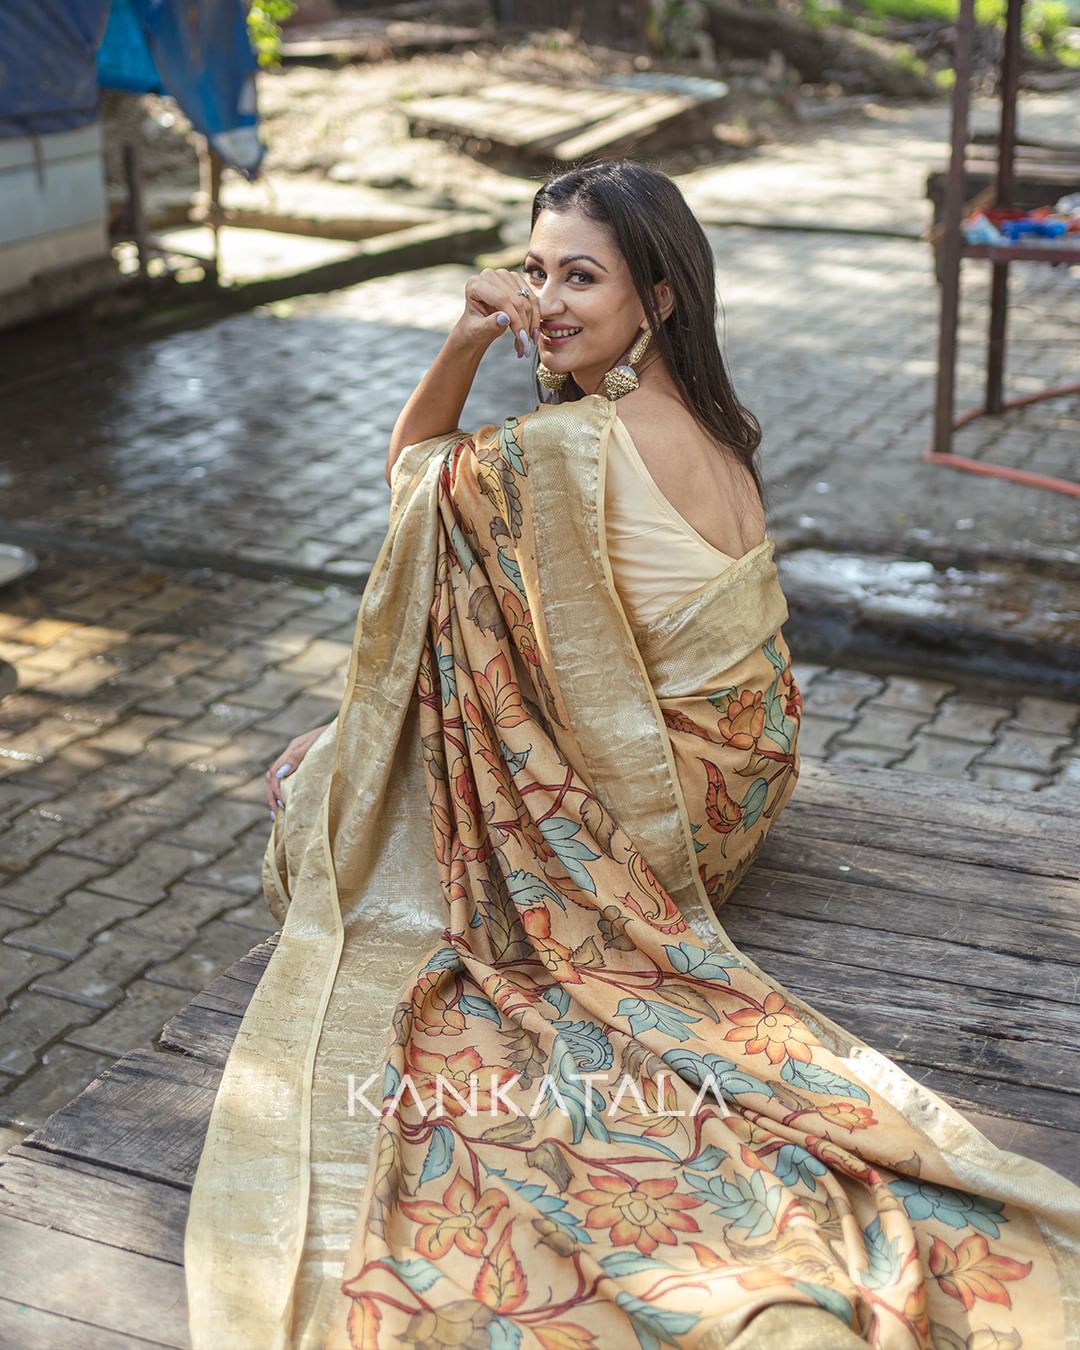 Vizag-based sari label Kankatala launches their Masterpieces collection at  Amethyst in Chennai